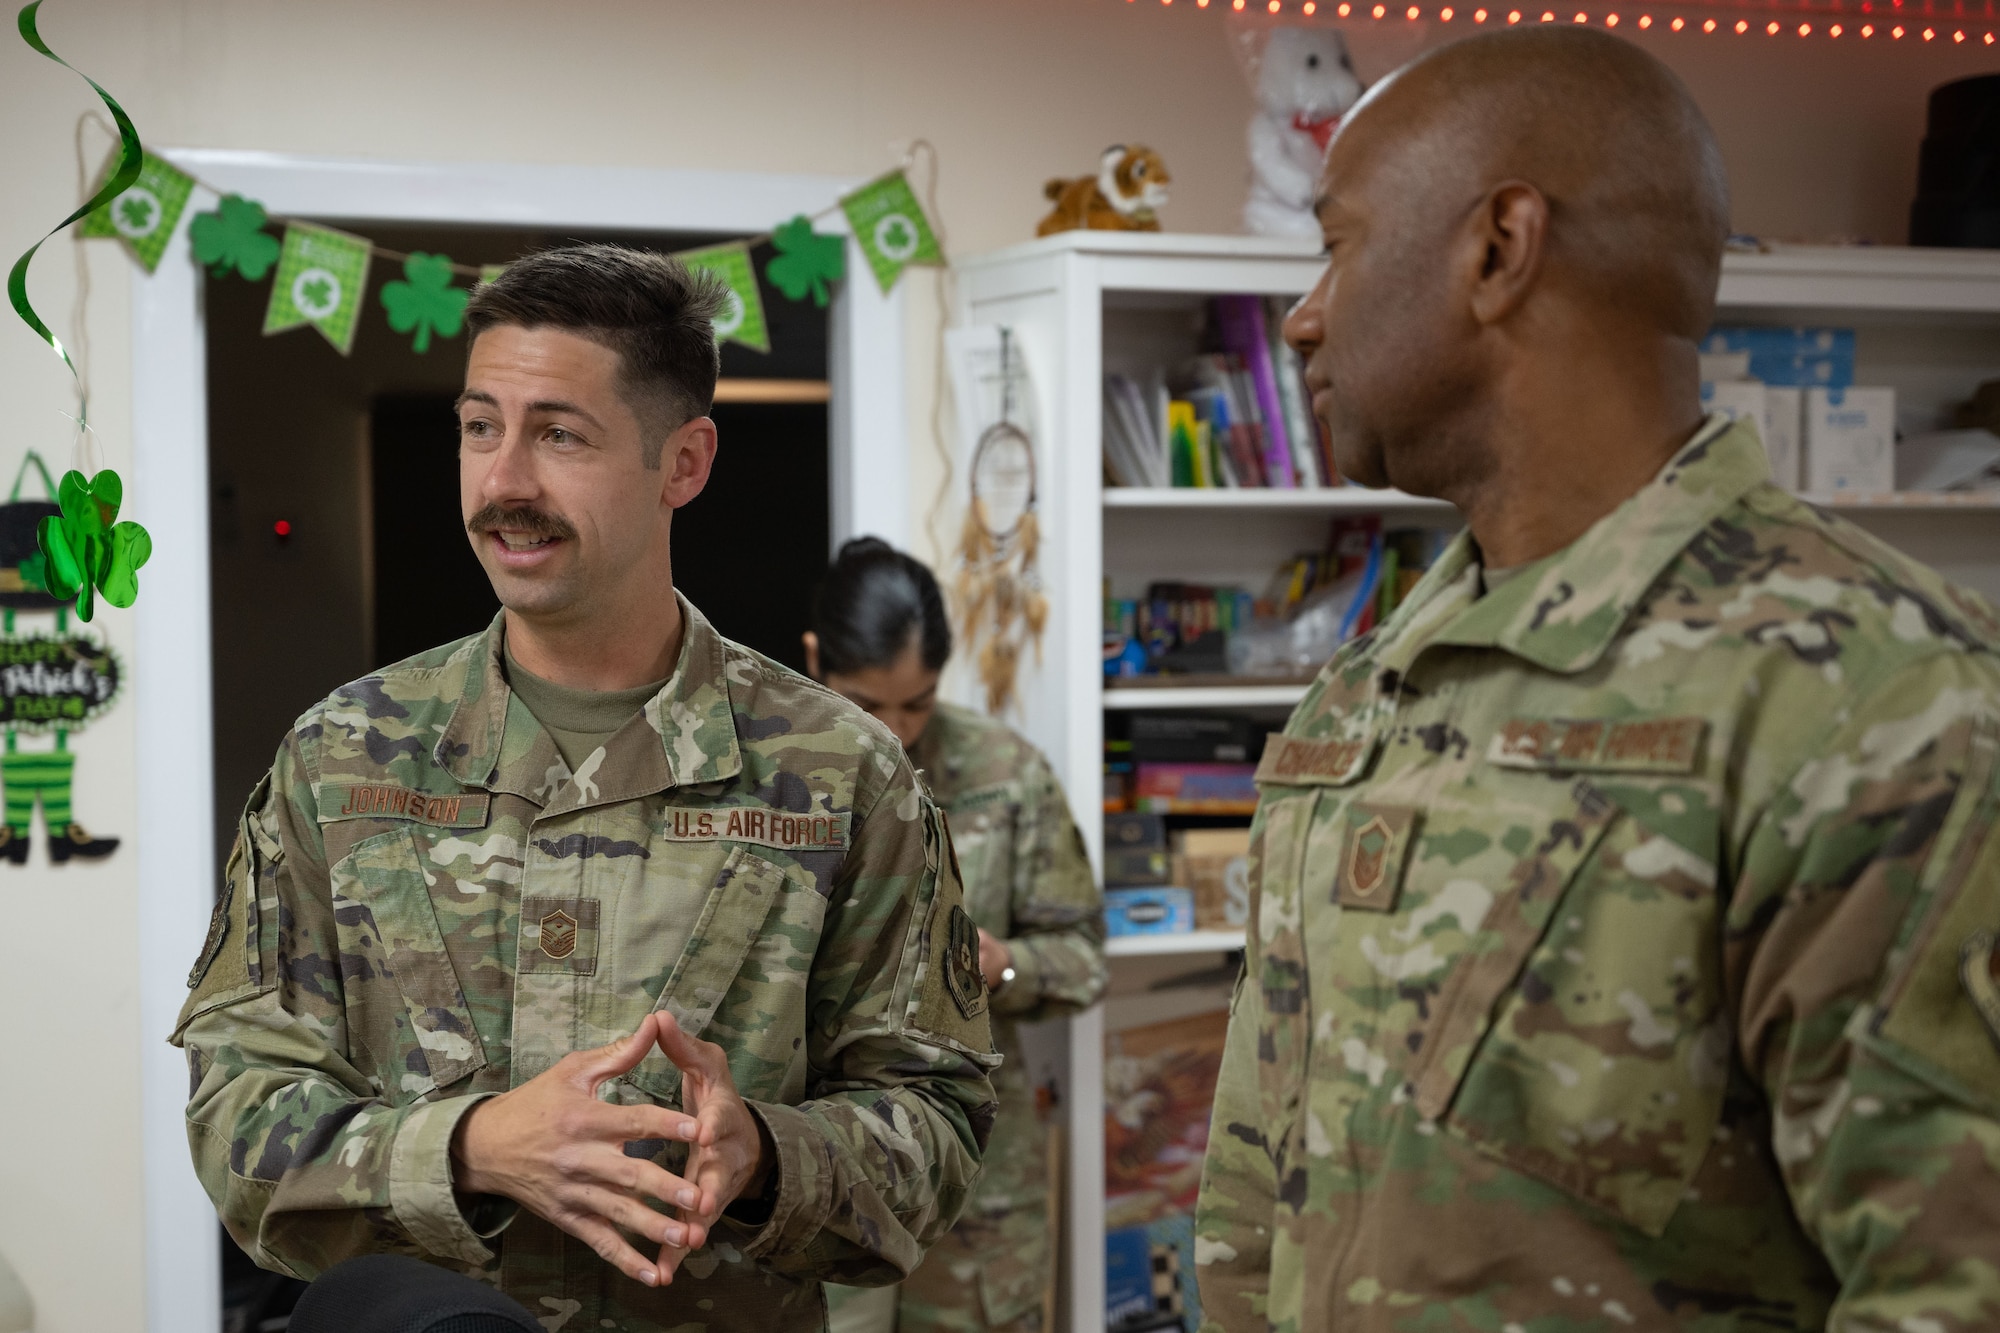 U.S. Air Force Master Sgt. Joshua Johnson (left), 1st Sgt., 120th Expeditionary Fighter Generation Squadron, mentors U.S. Air Force Master Sgt. Malcom Chandler, 120th Expeditionary Fighter Squadron, Additional Duty 1st Sgt, at Prince Sultan Air Base, Kingdom of Saudi Arabia, March 18th, 2022. Johnson coached and mentored four Additional Duty 1st Sgts within two units. (Photo by U.S. Air Force 1st Lt. Benjamin Kimball)